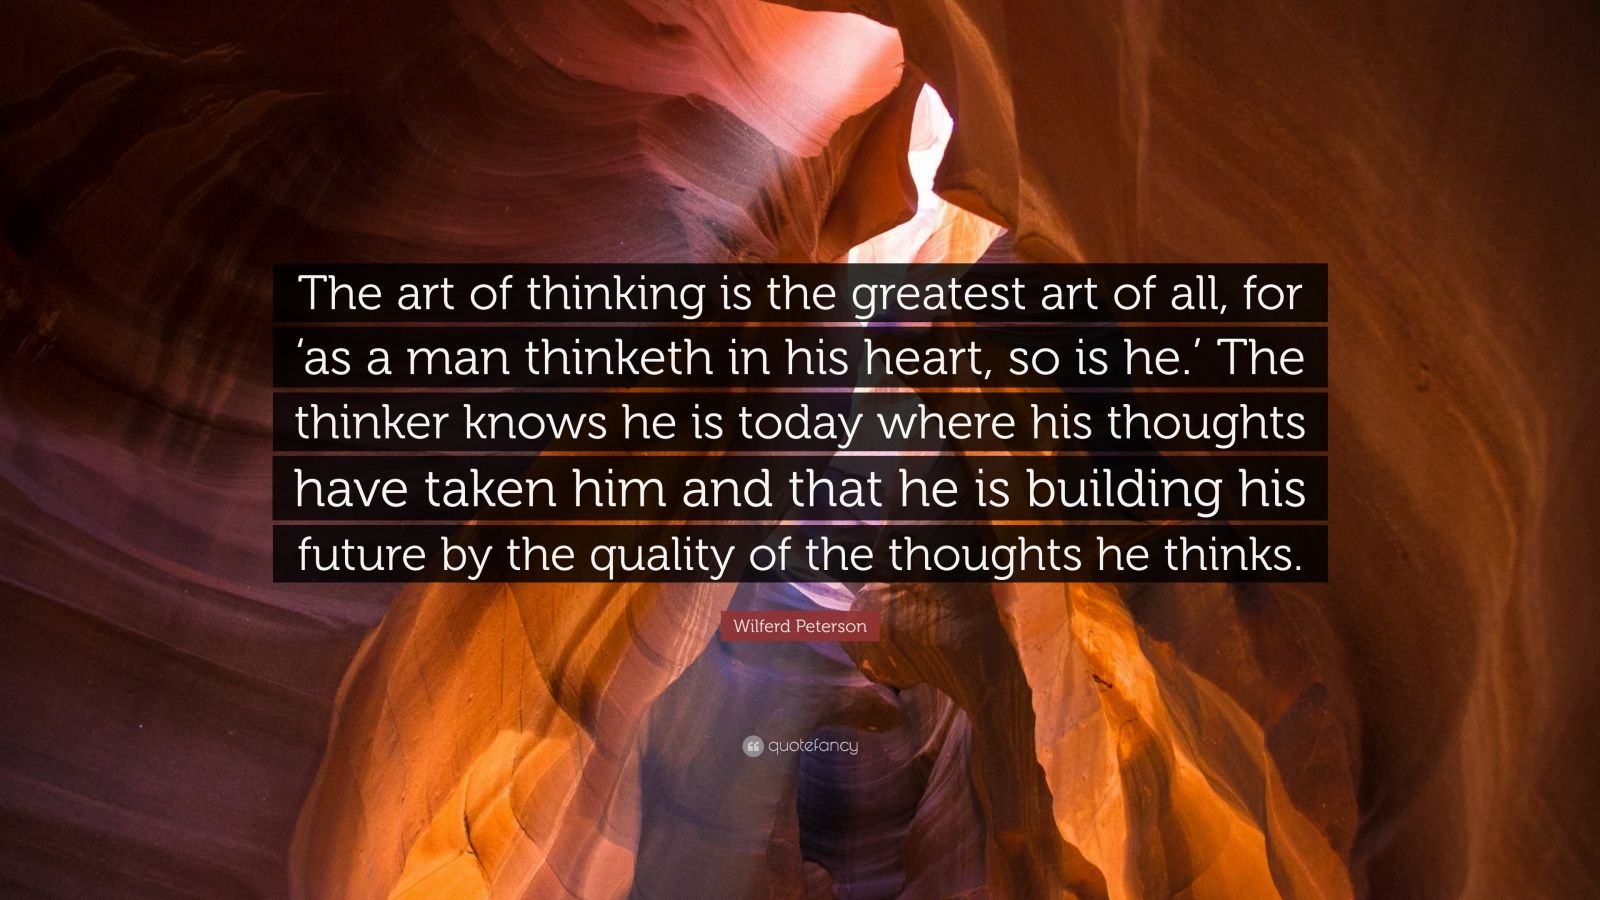 Wilferd Peterson Quote: “The art of thinking is the greatest art of all